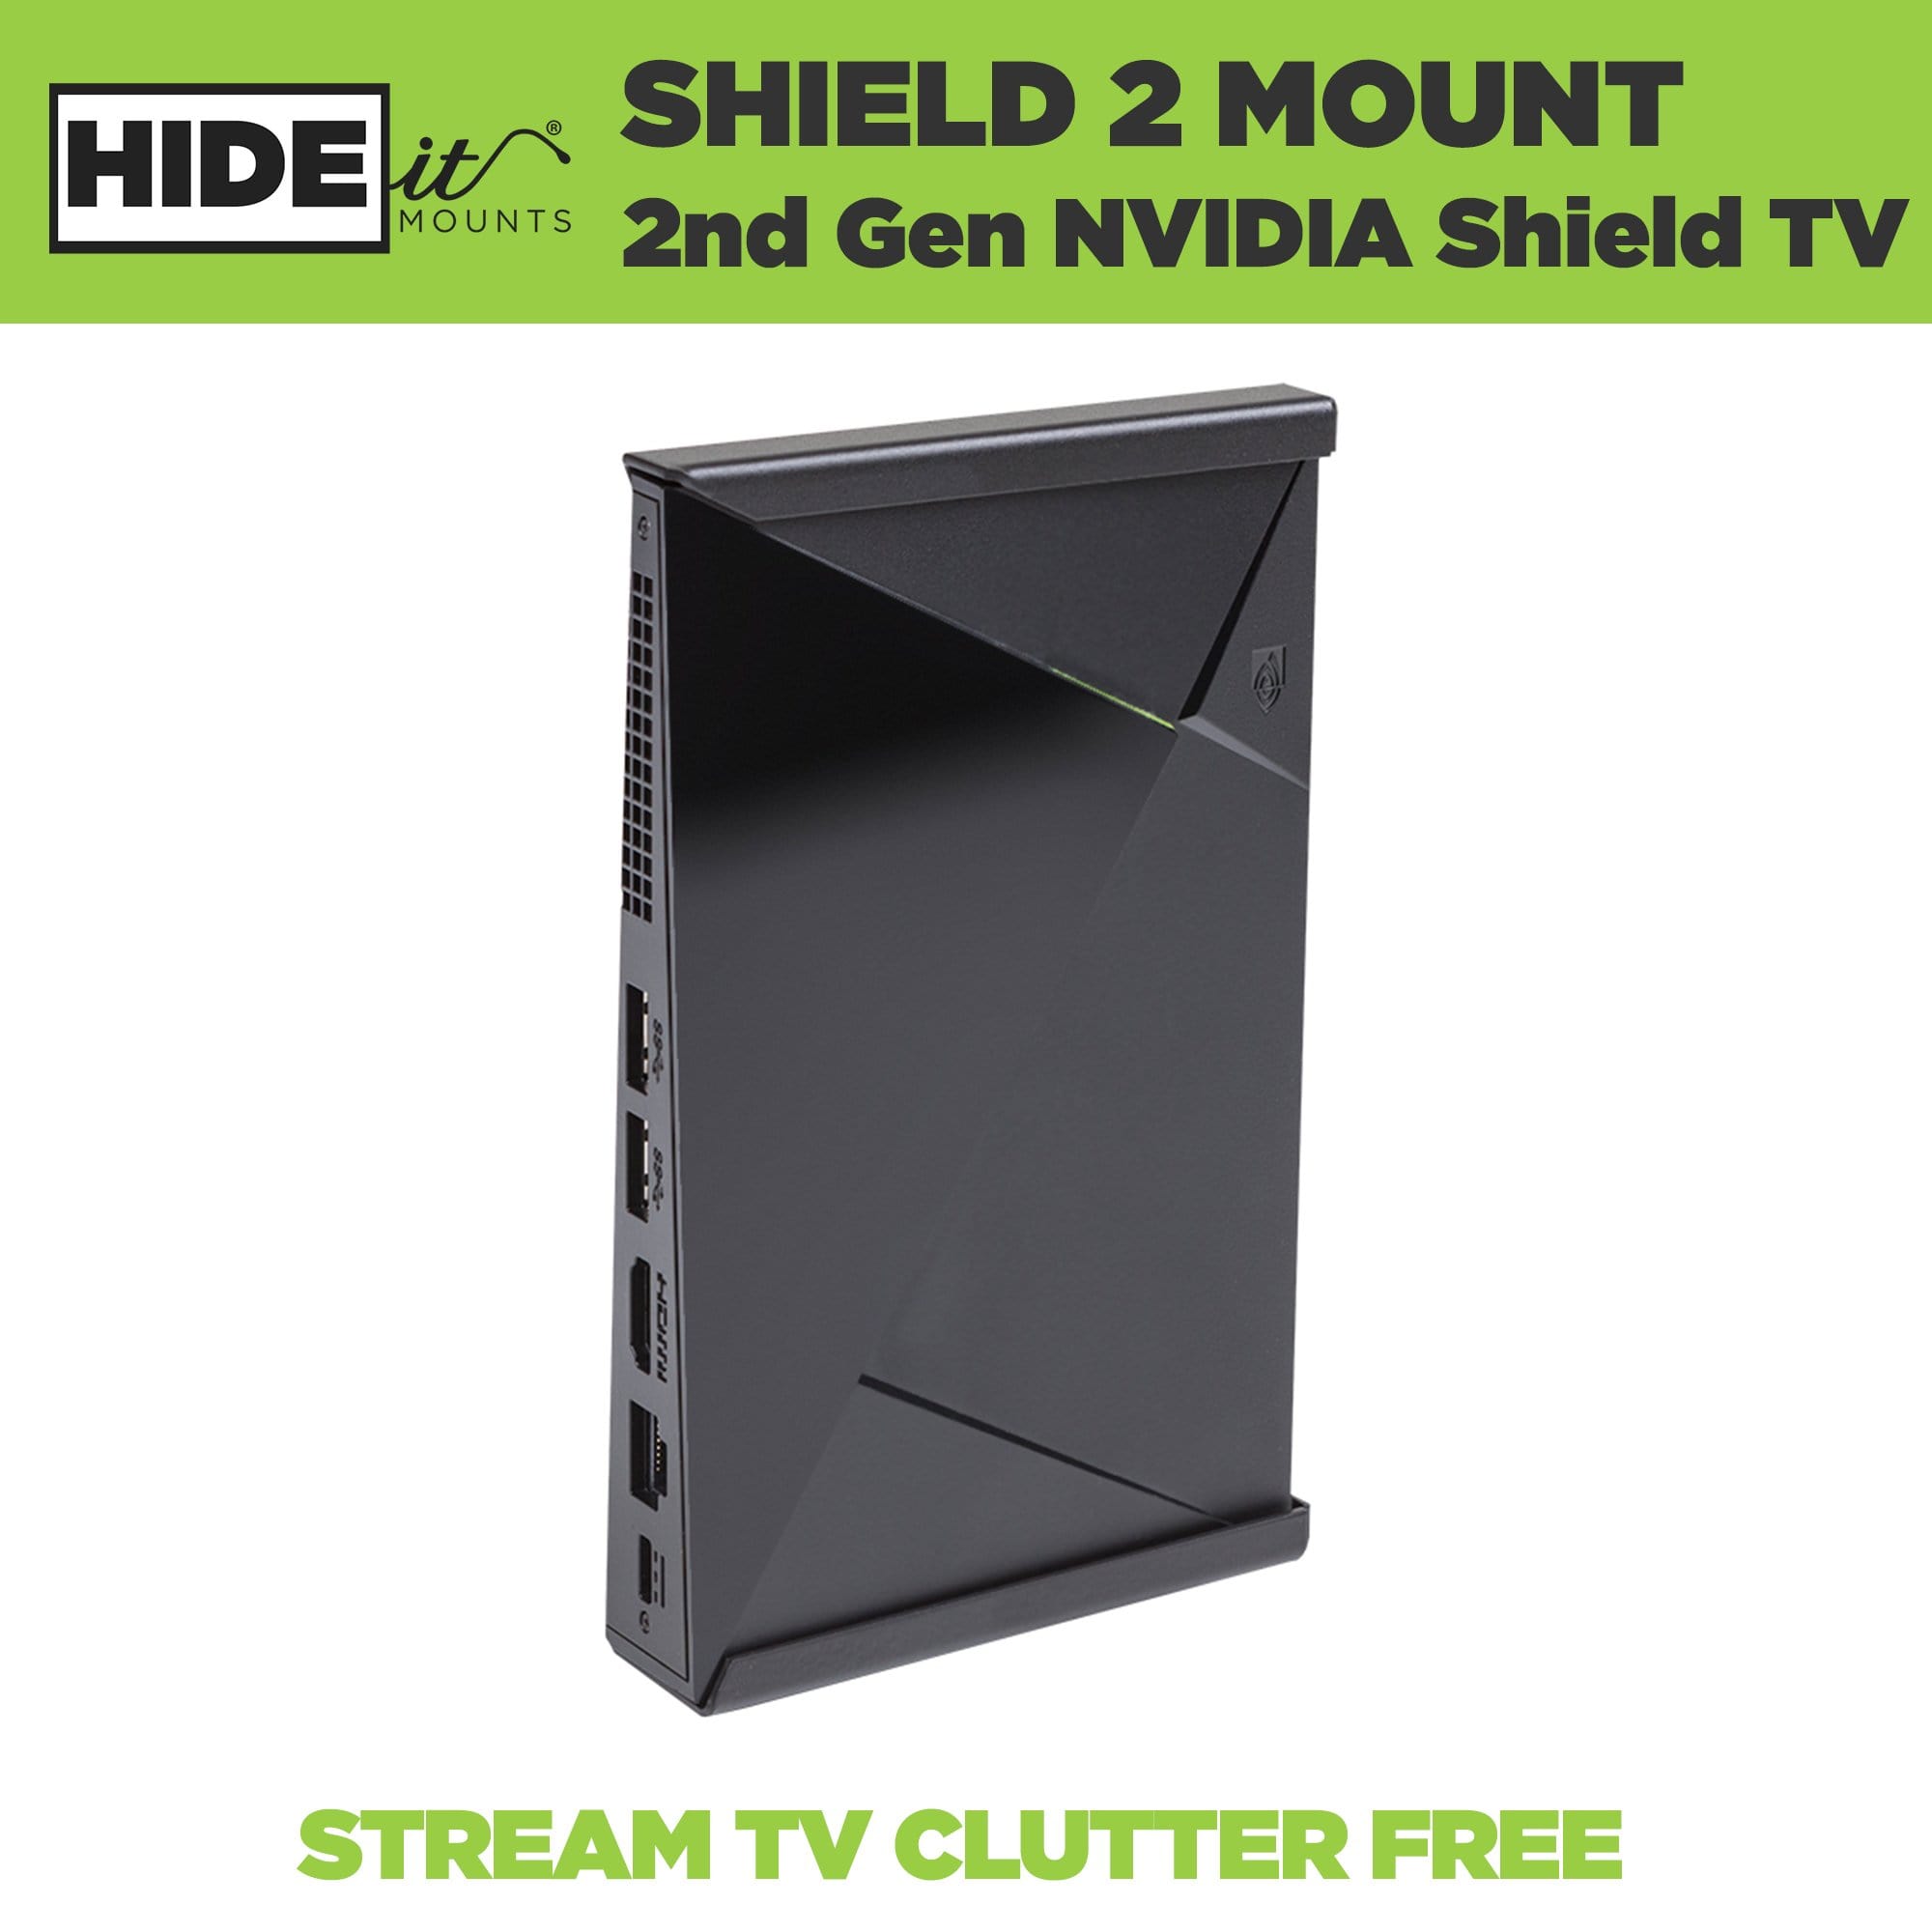 How to Hide TV Wires for a Wall Mounted TV – FireFold